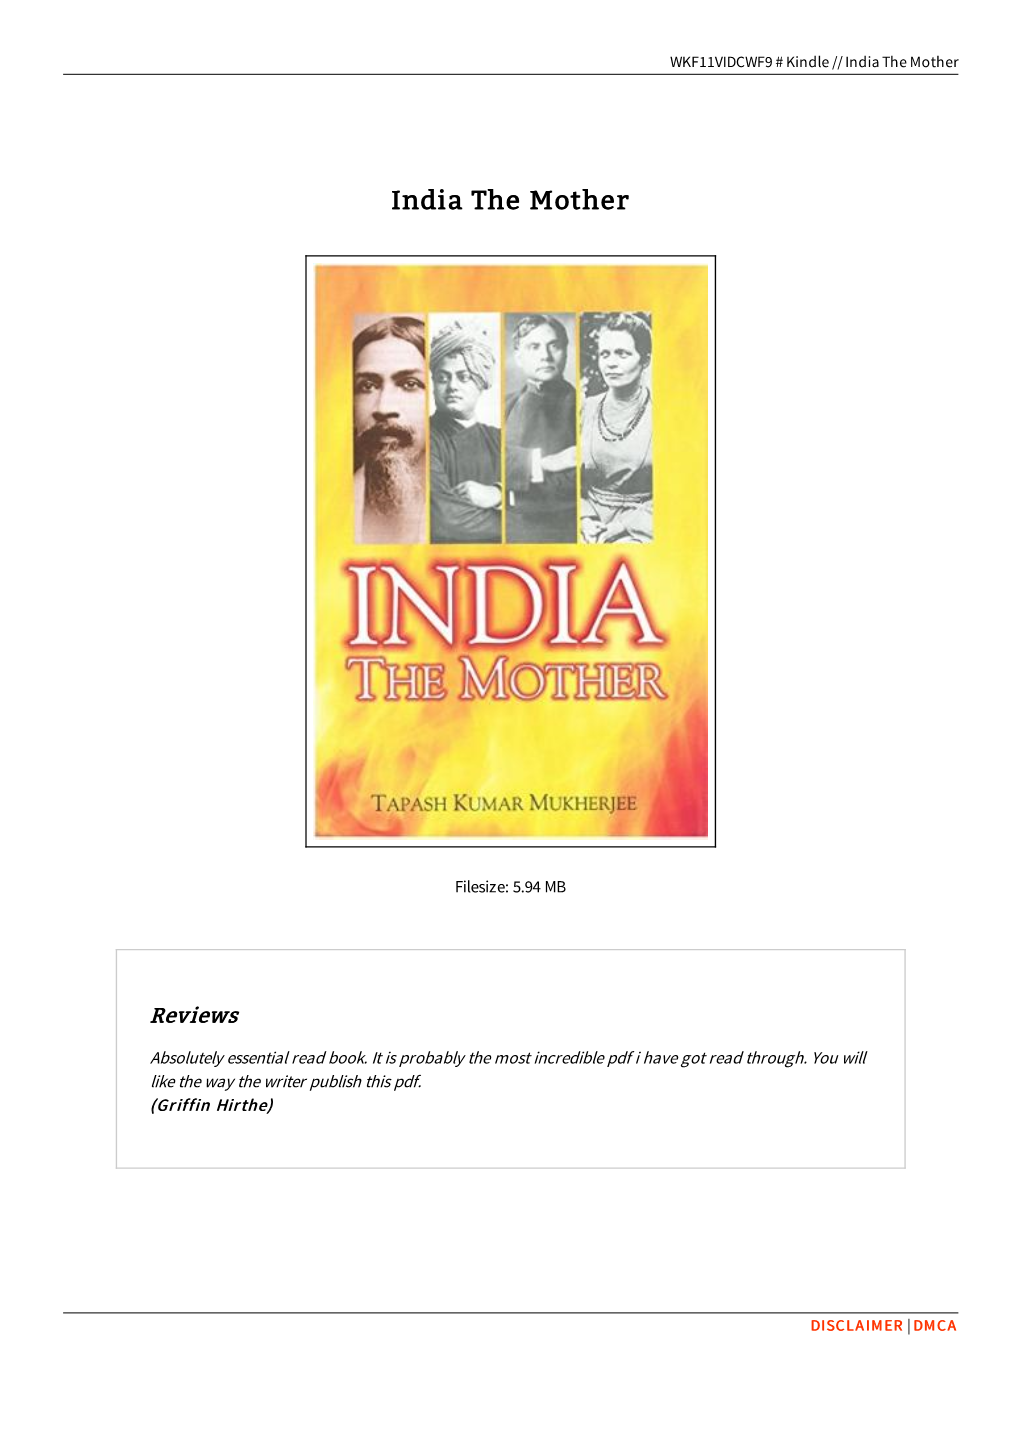 Read Book \ India the Mother FVHJFMVMMRNA